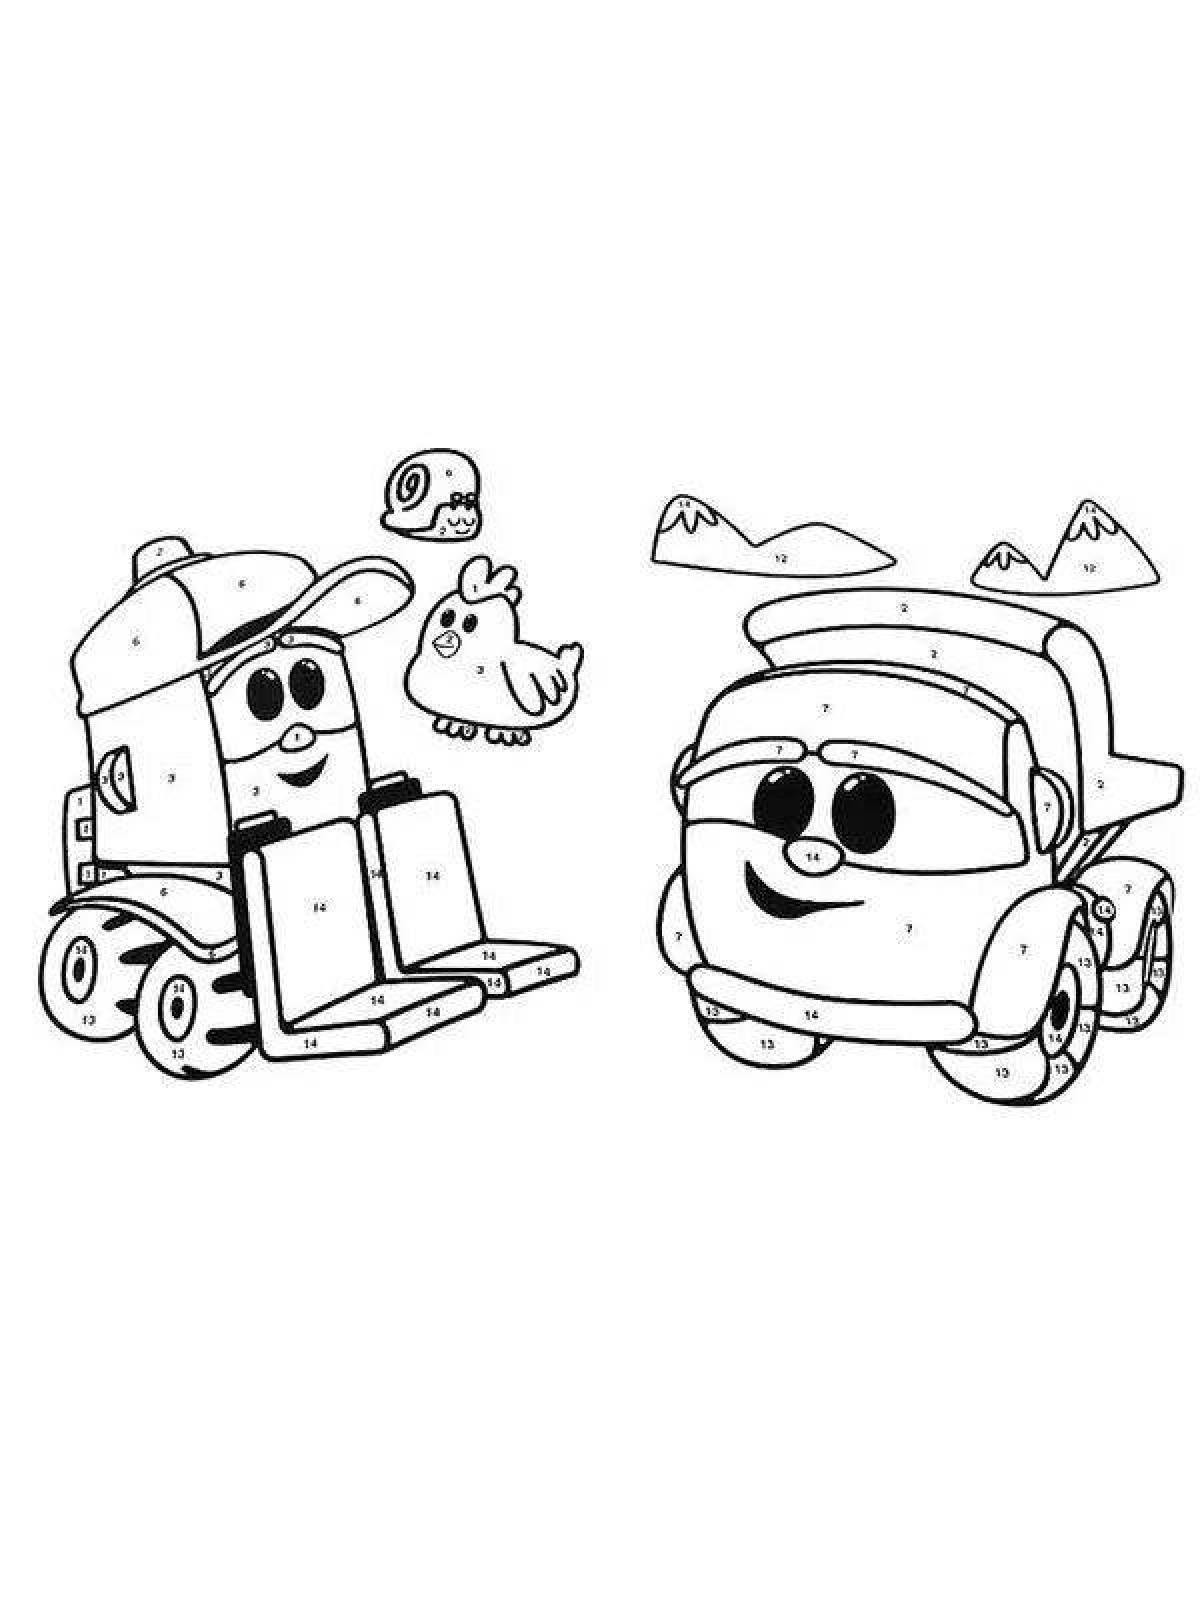 Left truck tow truck coloring page